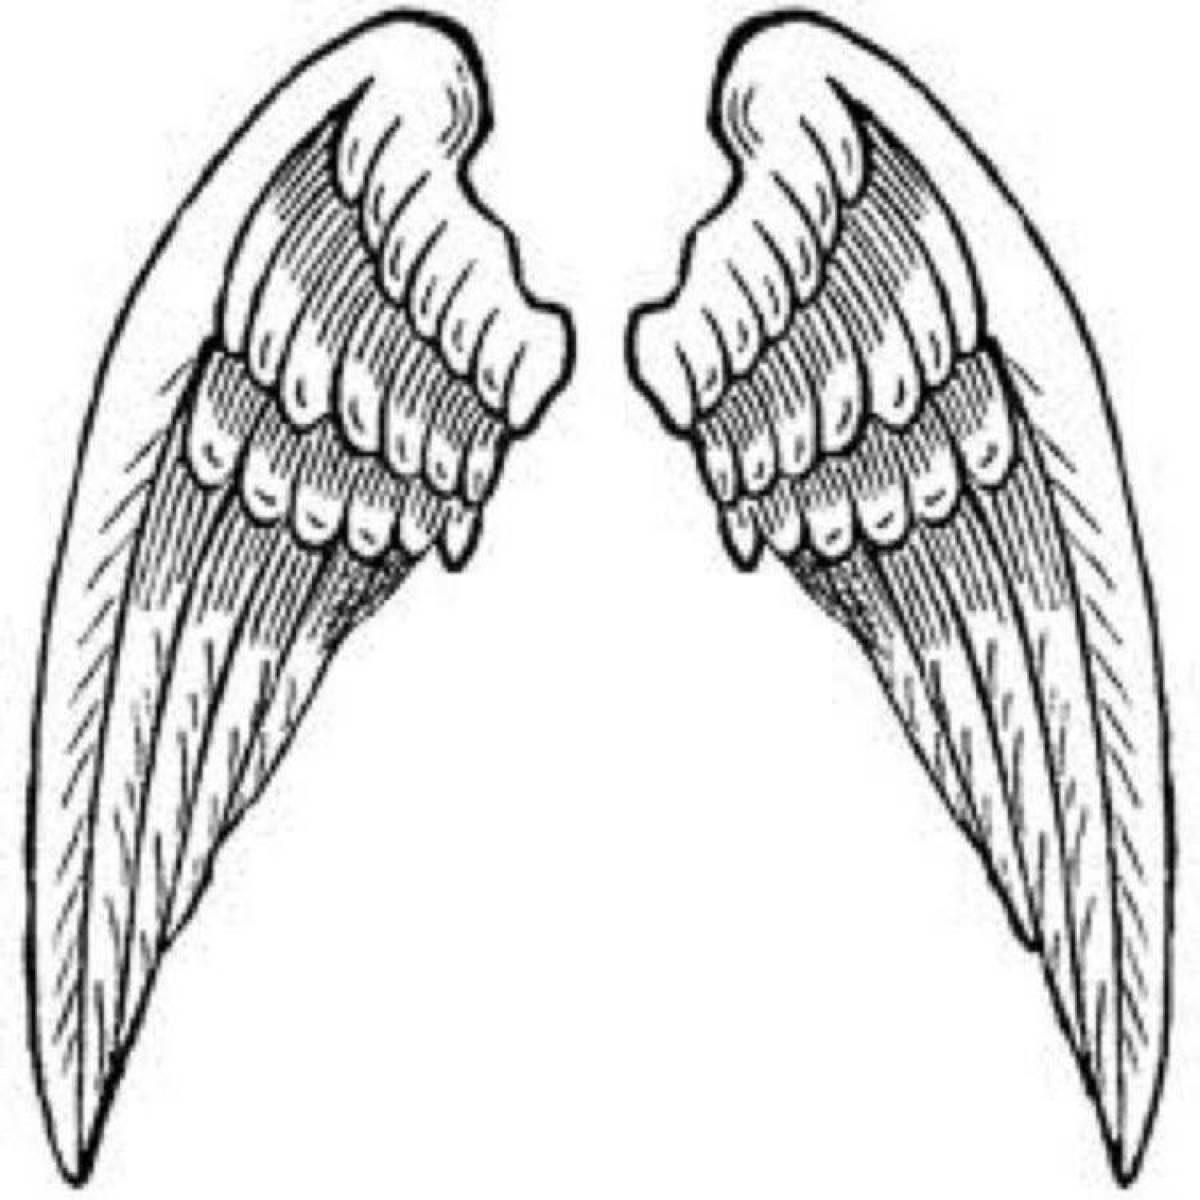 Awesome angel wings coloring page